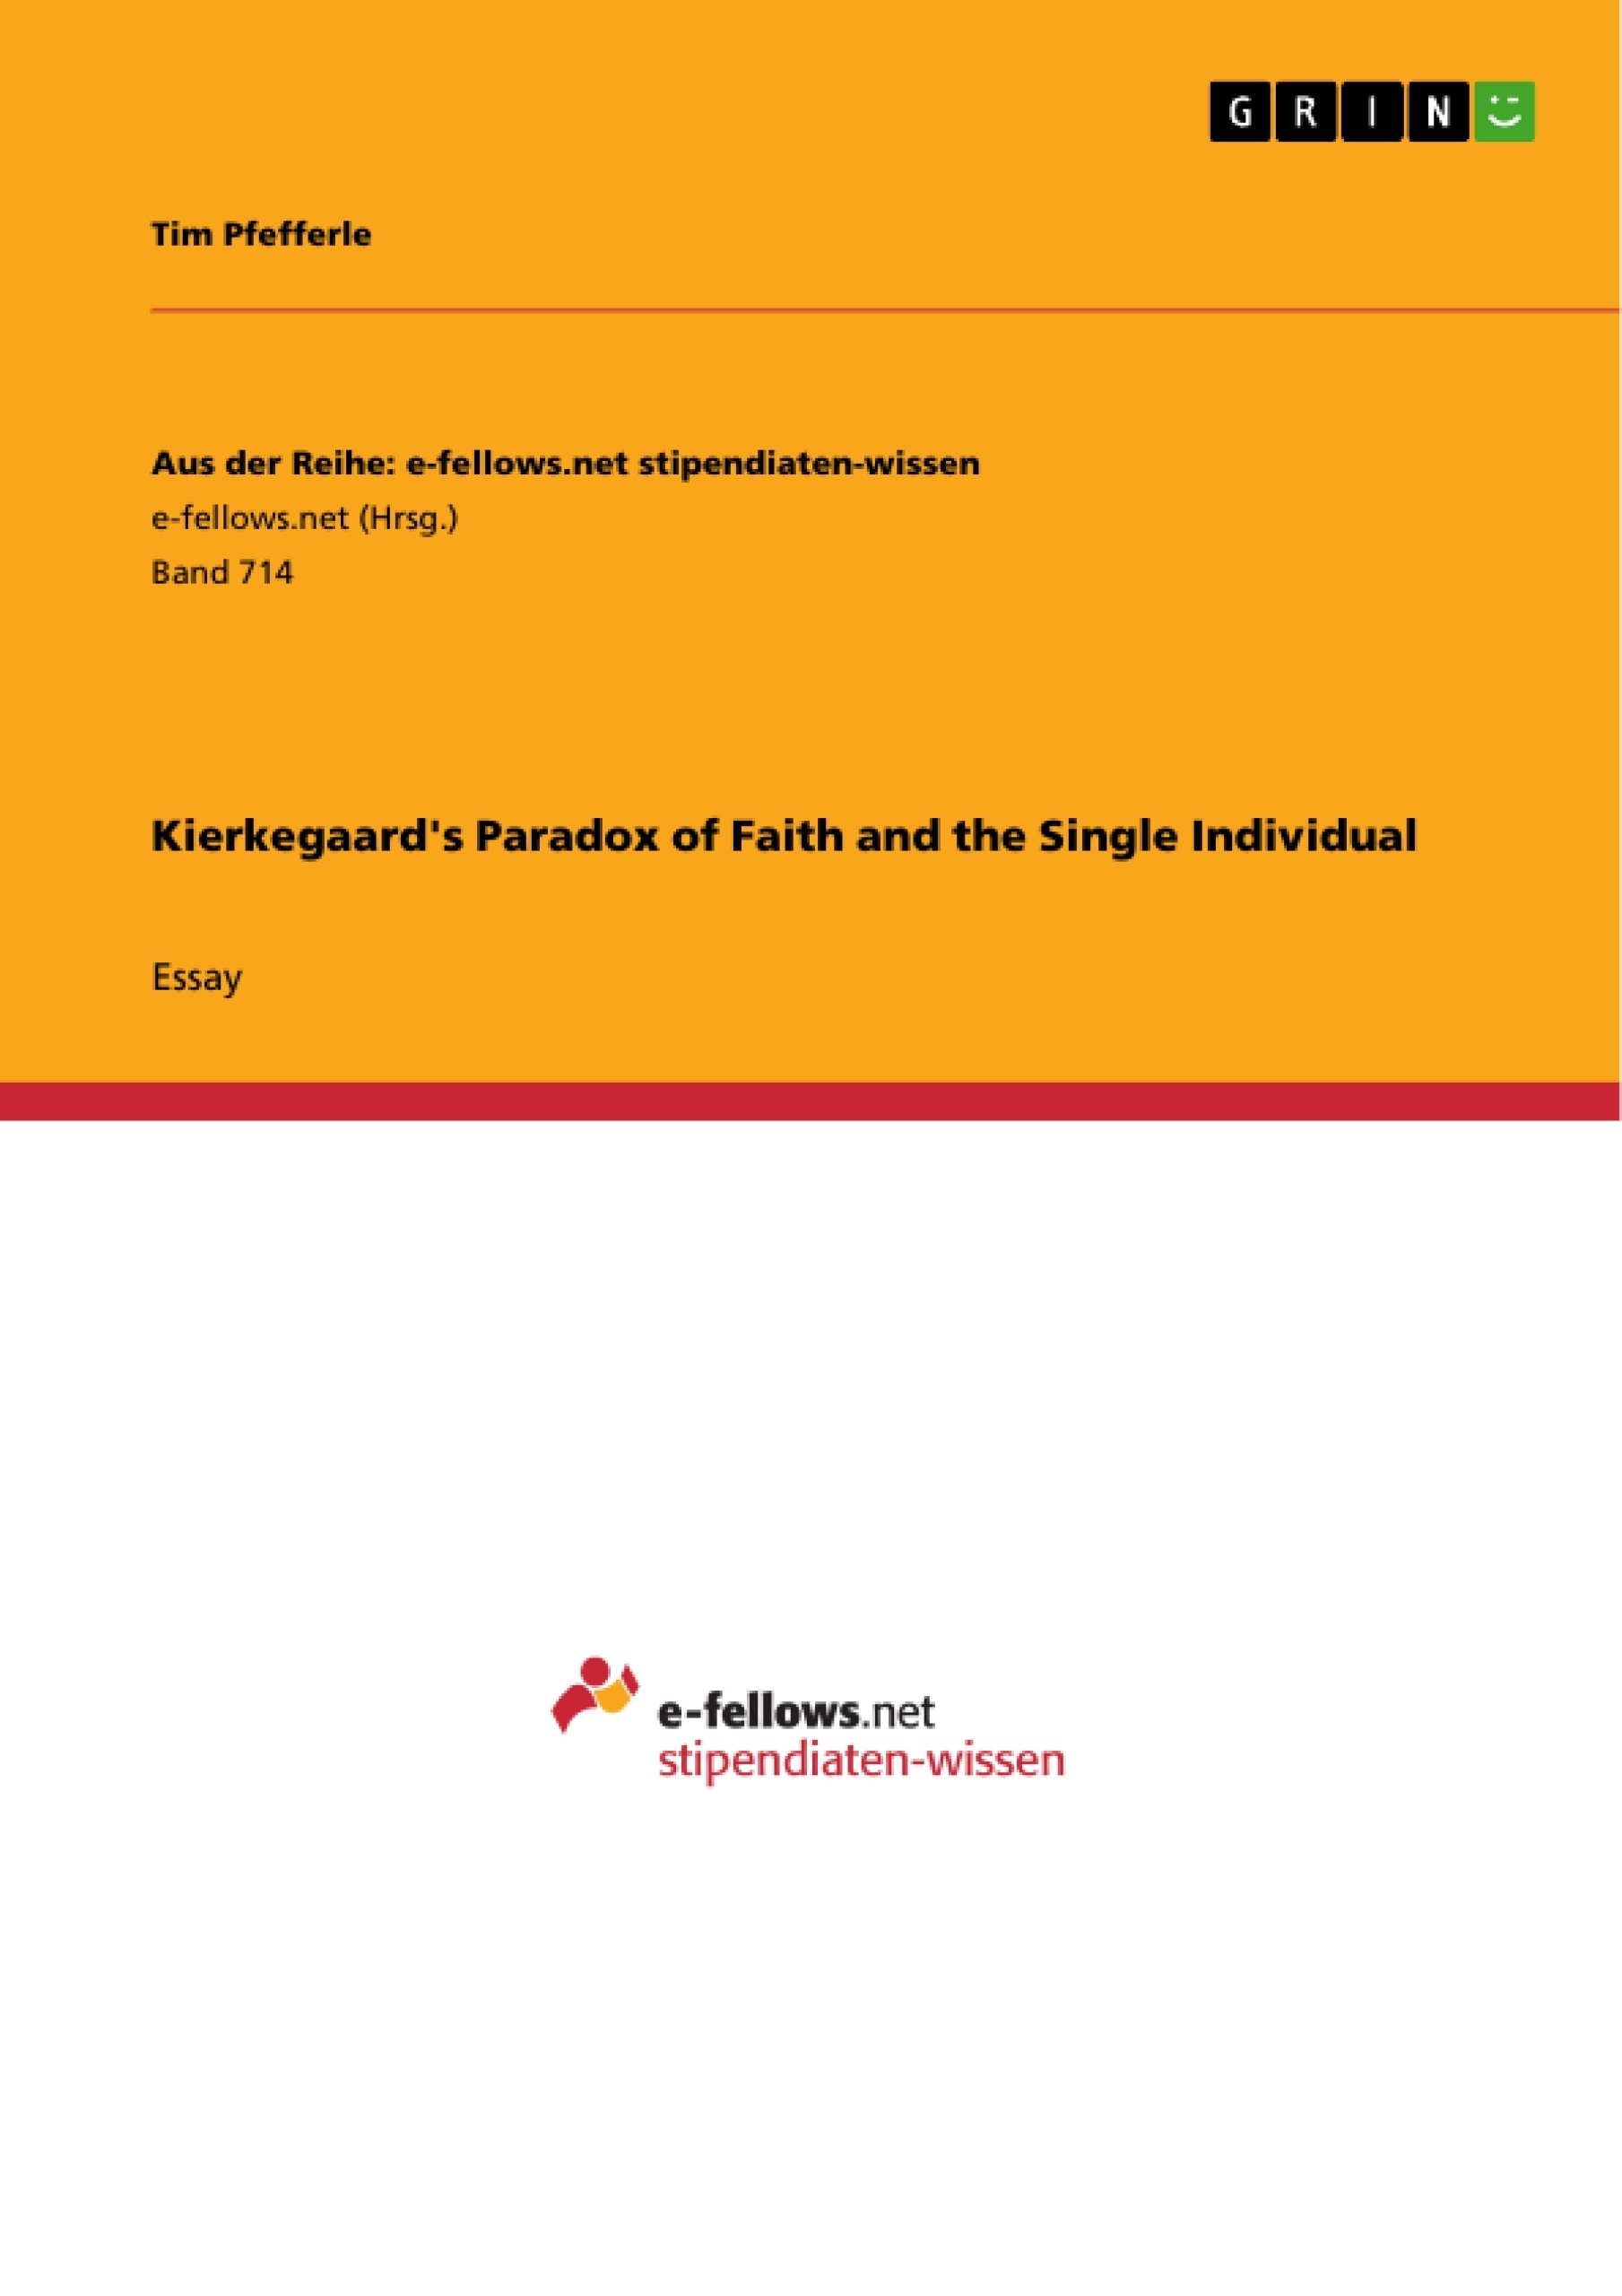 Titre: Kierkegaard's Paradox of Faith and the Single Individual